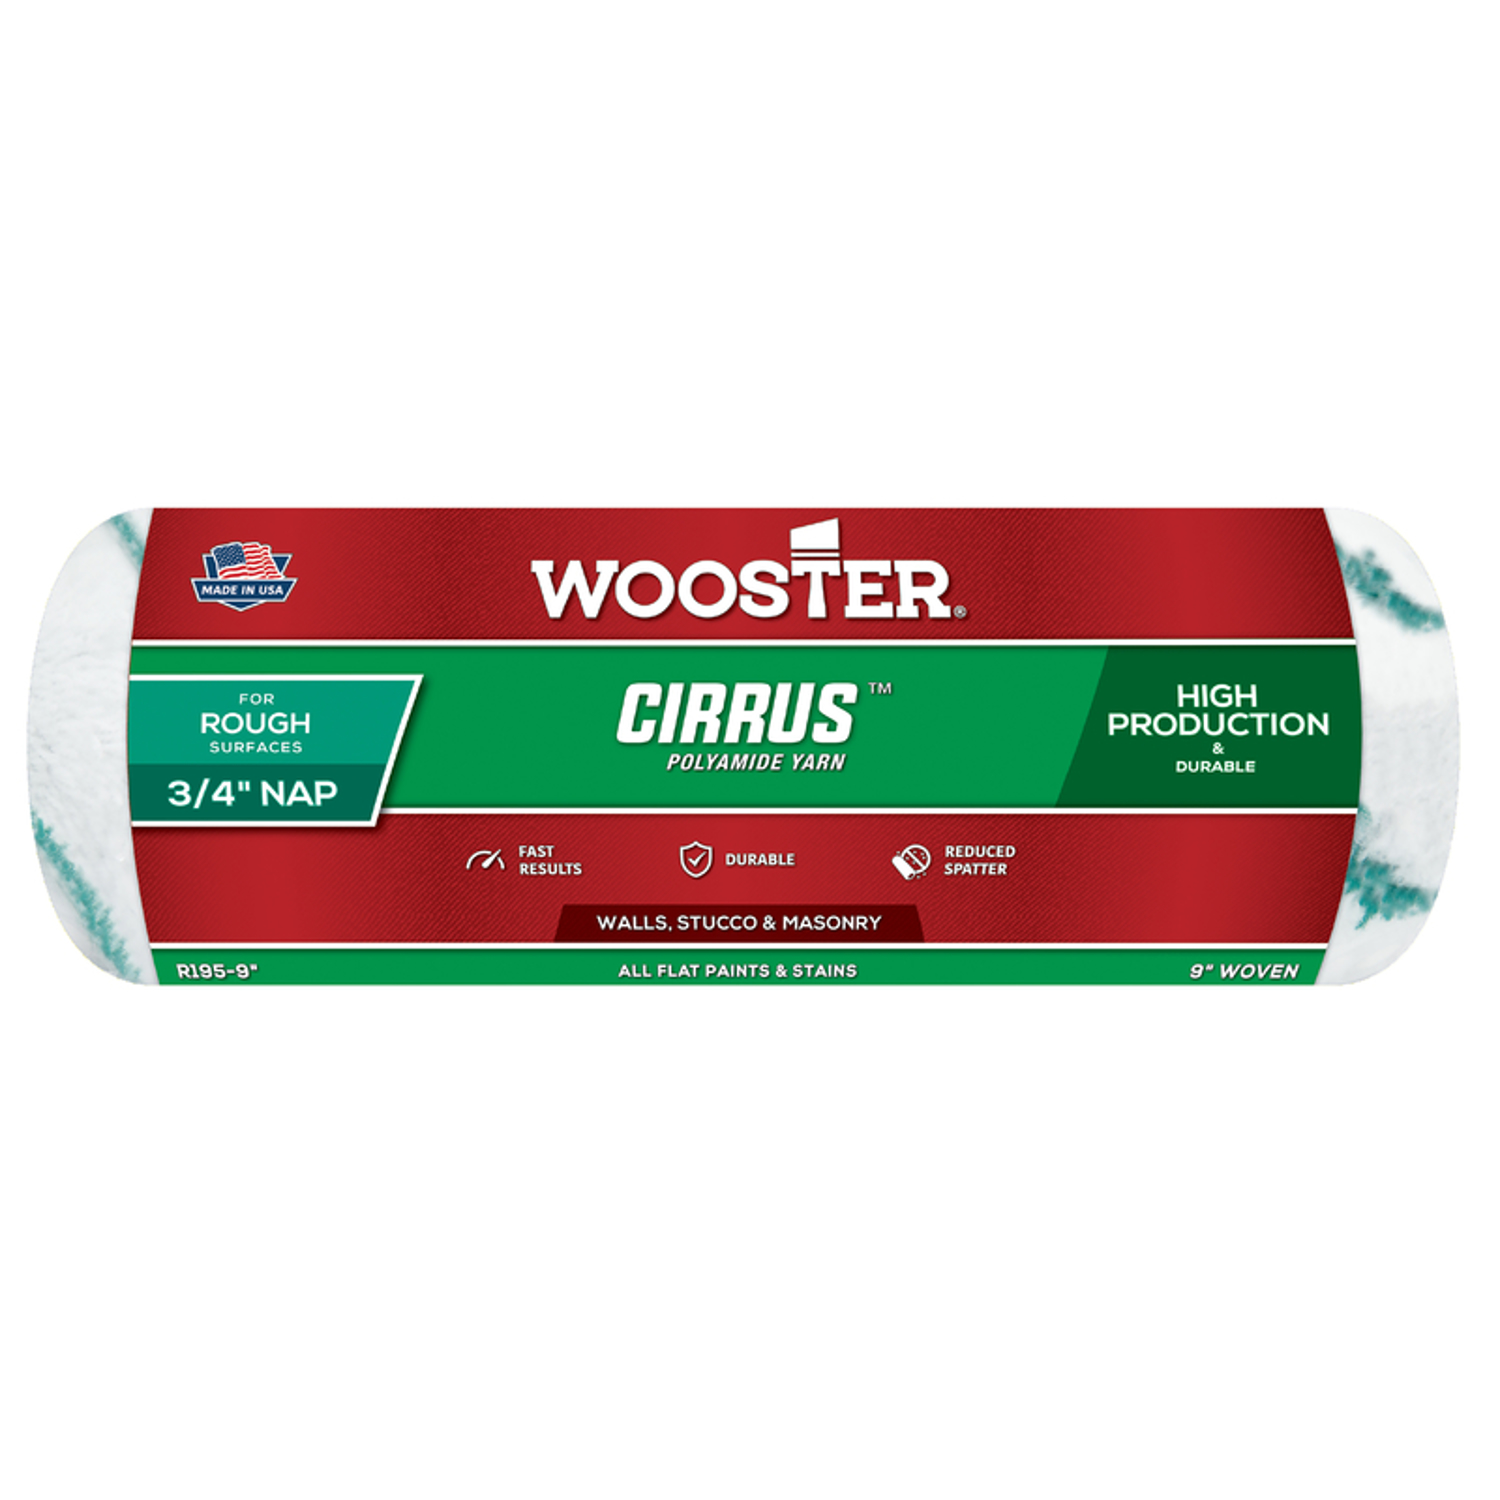 Photos - Putty Knife / Painting Tool Wooster Cirrus Yarn 9 in. W X 3/4 in. Regular Paint Roller Cover 1 pk R195